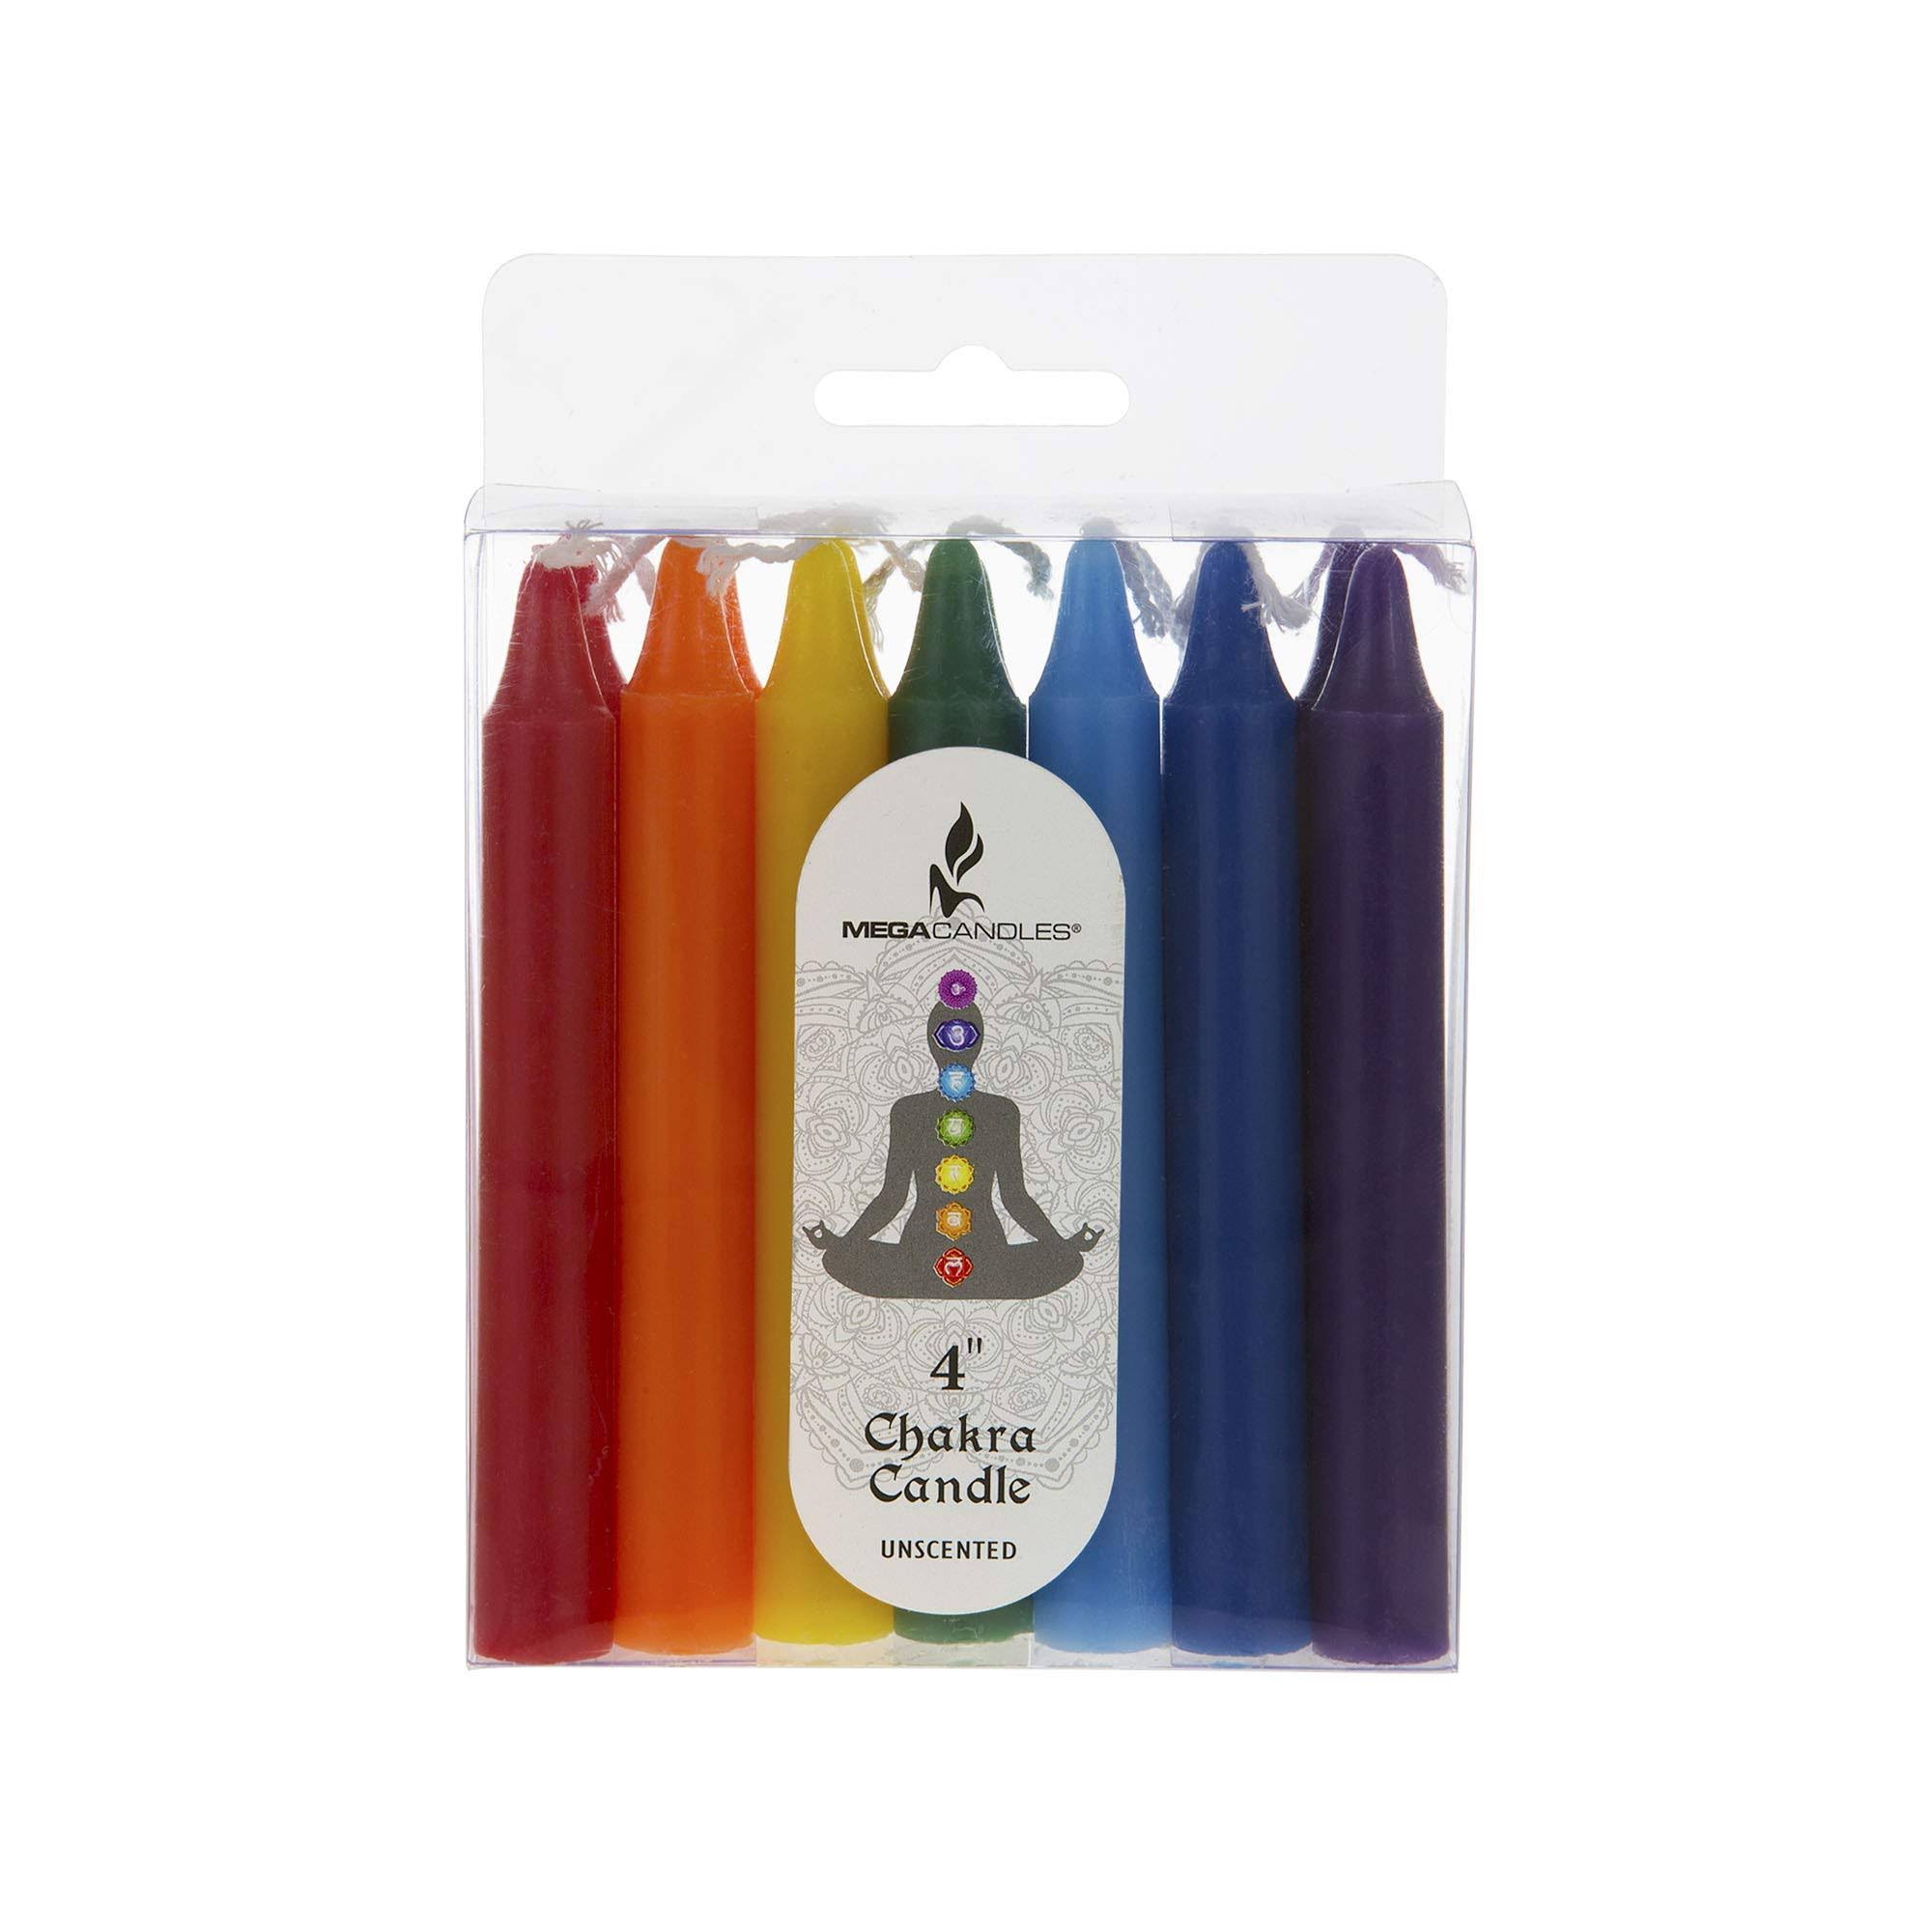 Mega Candles 14 Pcs Unscented Chakra Straight Taper Candle, Hand Poured Premium Wax Candles 4 inch x 1/2 inch, 100% Lead Free Cotton Wick, Promotes